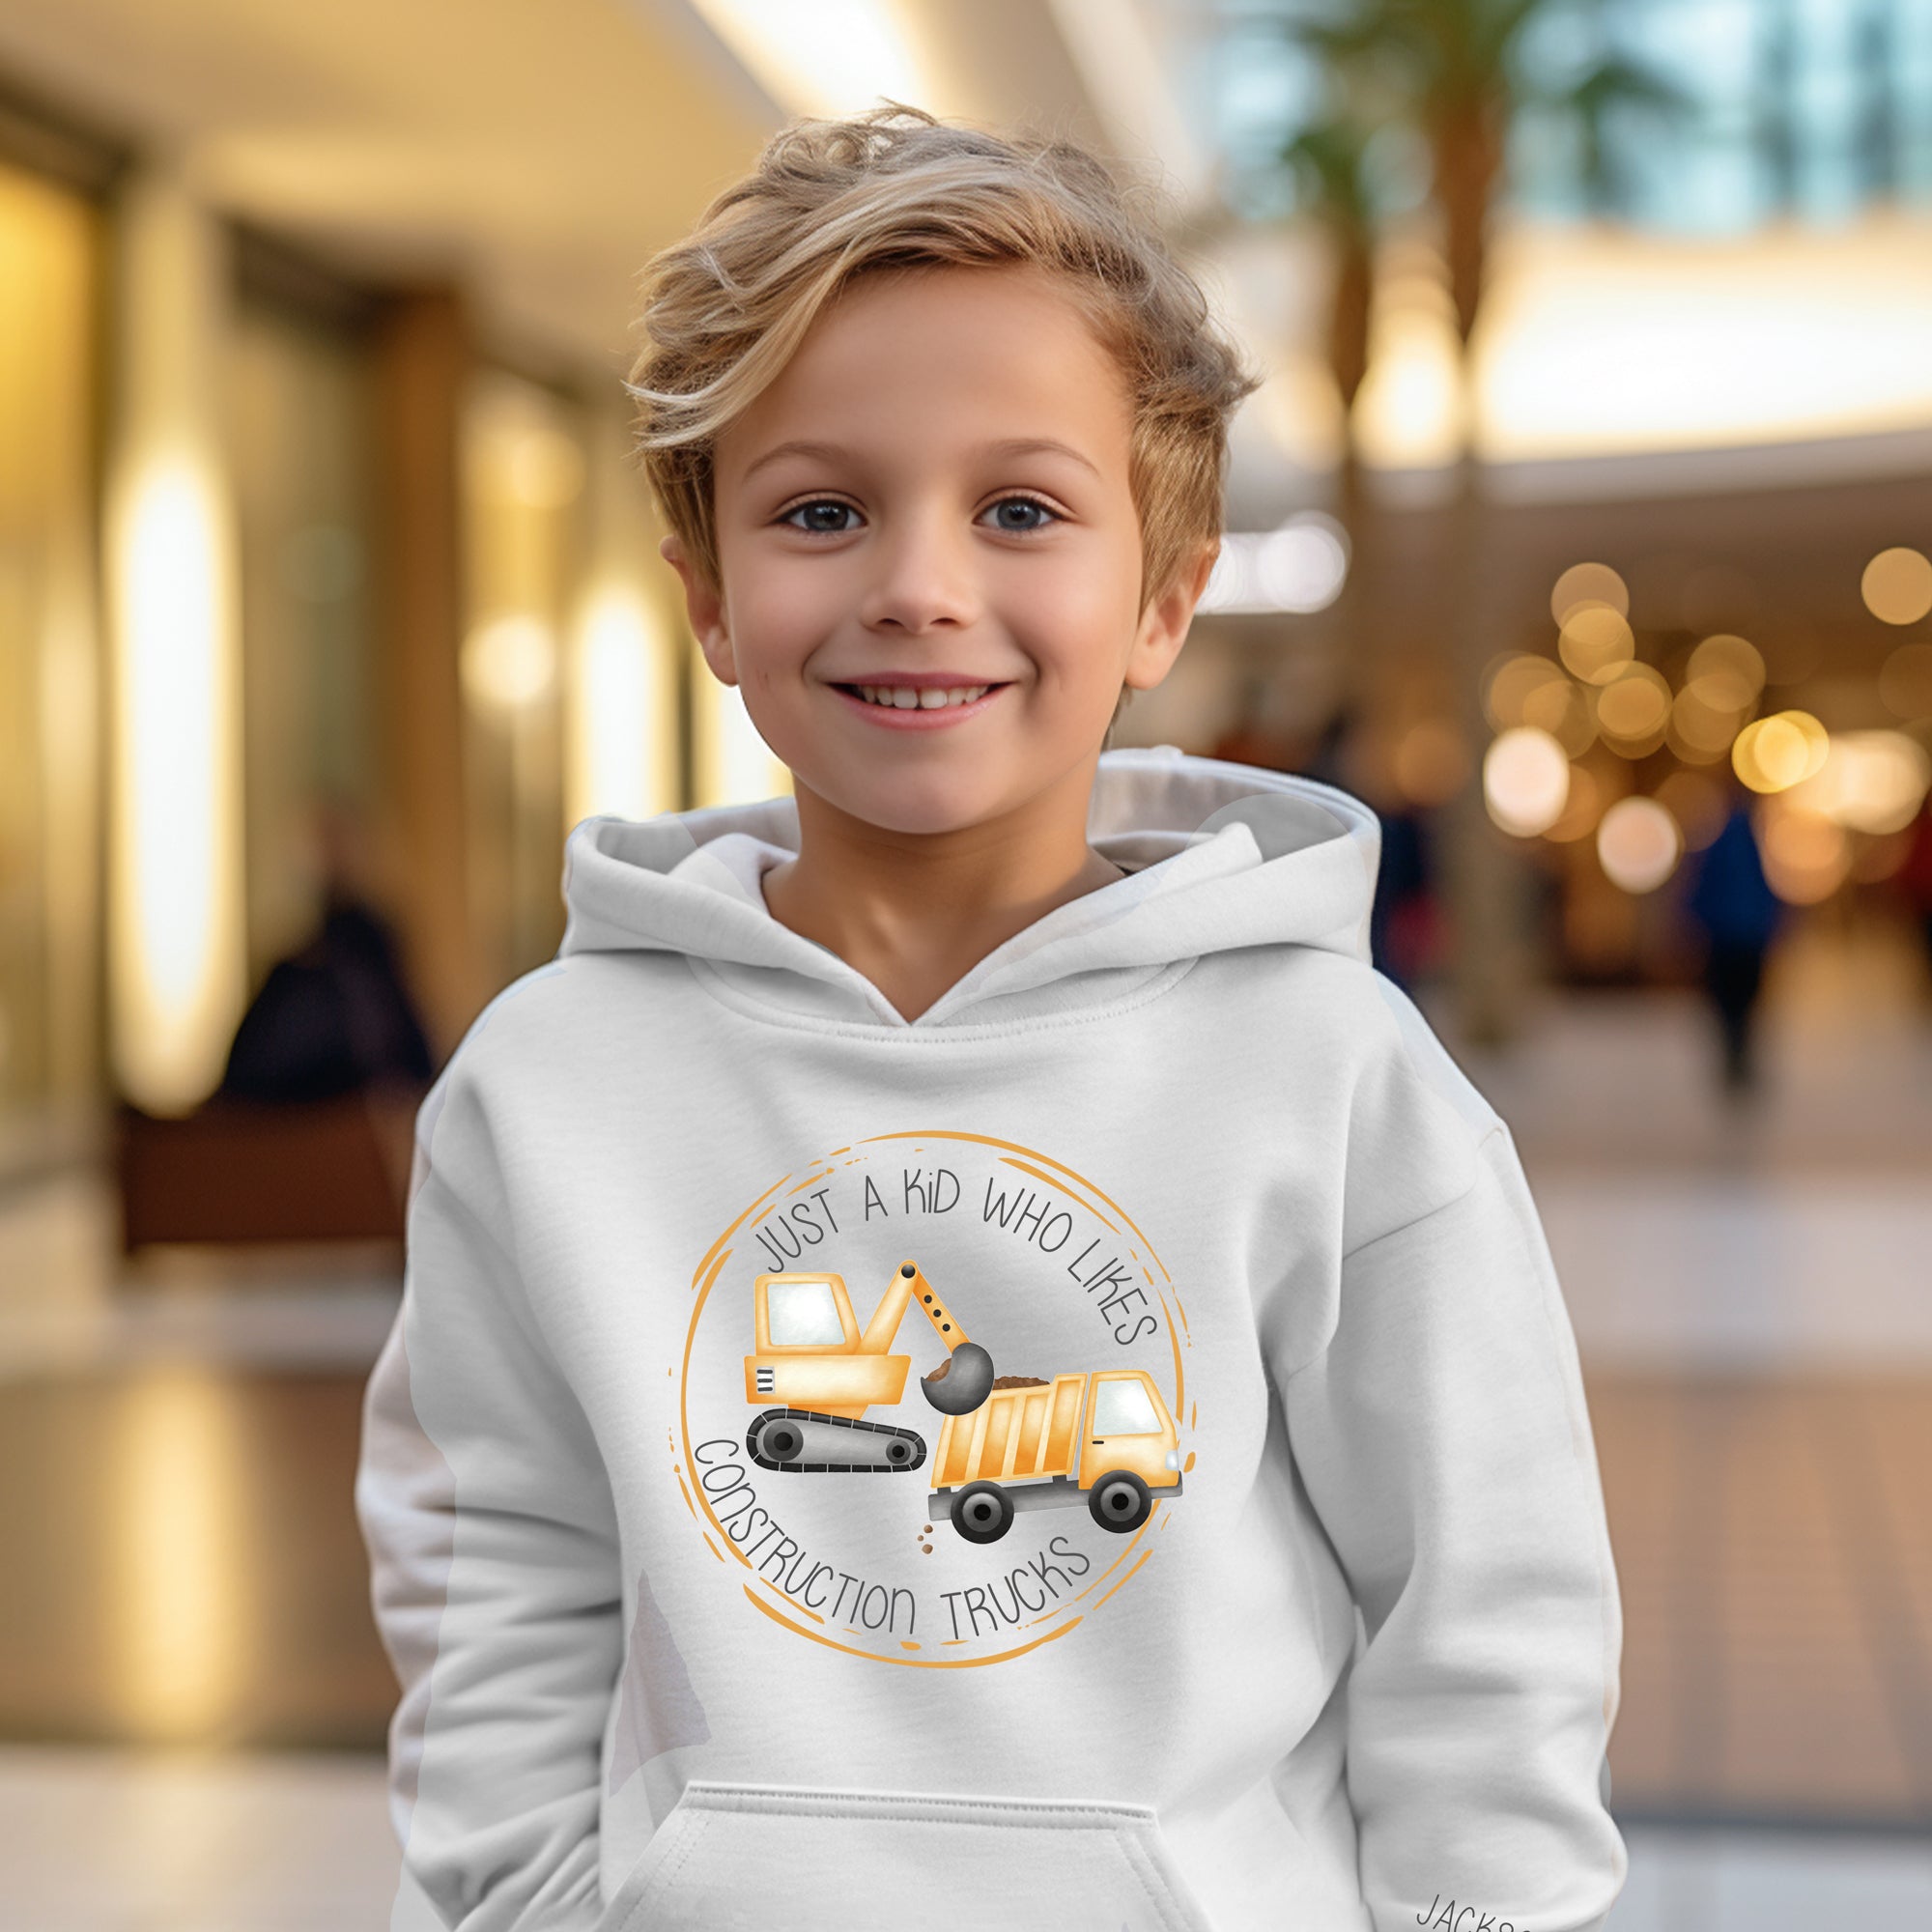 Just a Kid who likes CONSTRUCTION TRUCKS - Personalized Apparel